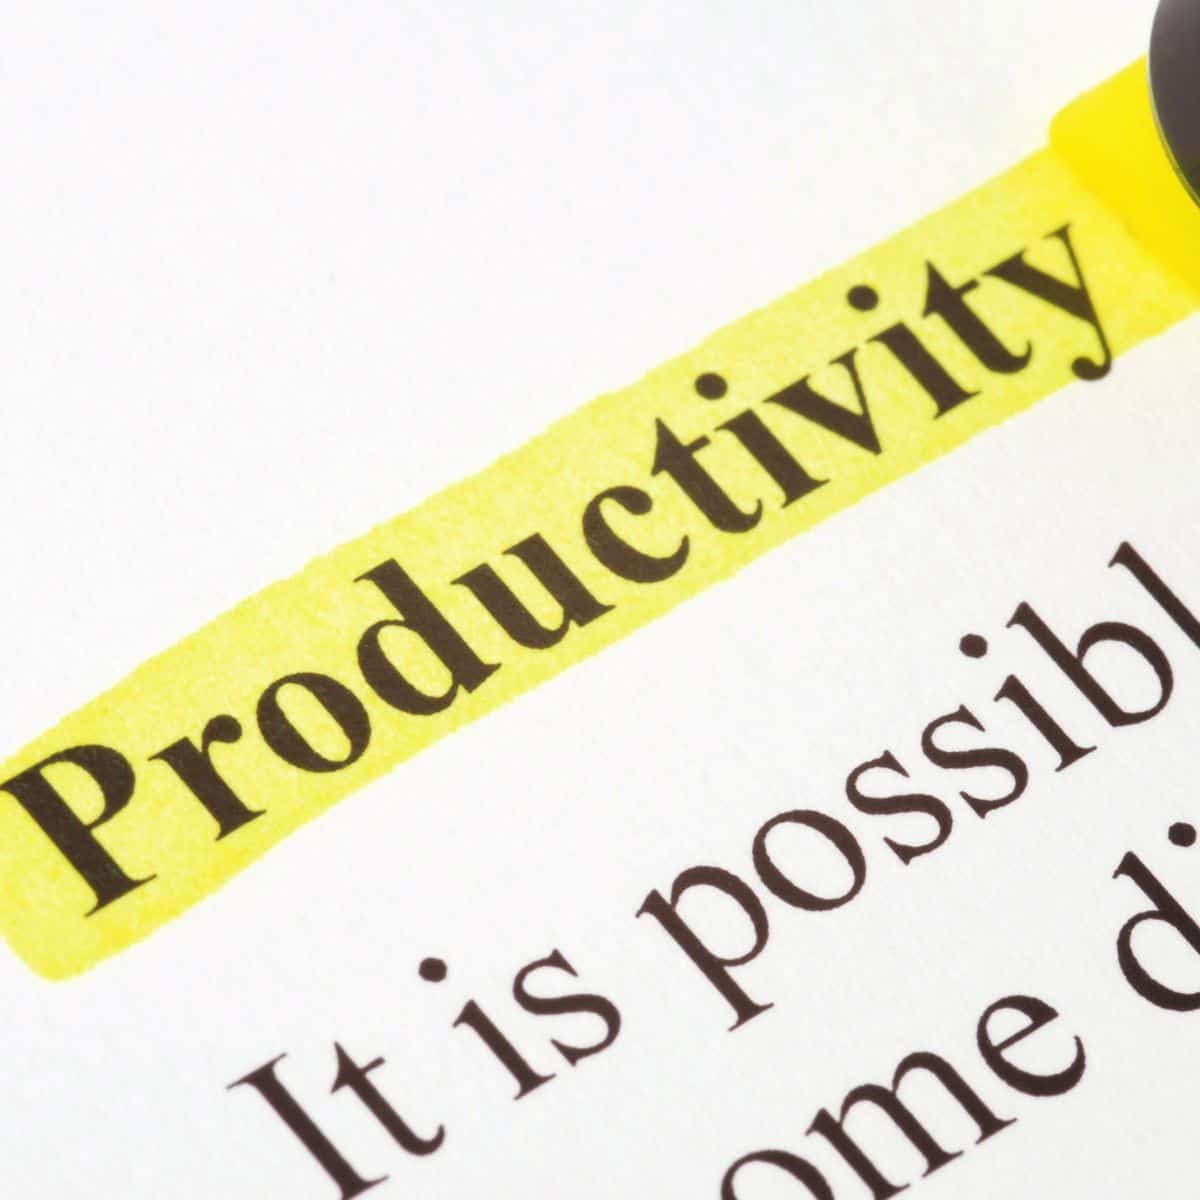 productivity written on a page and highlighted